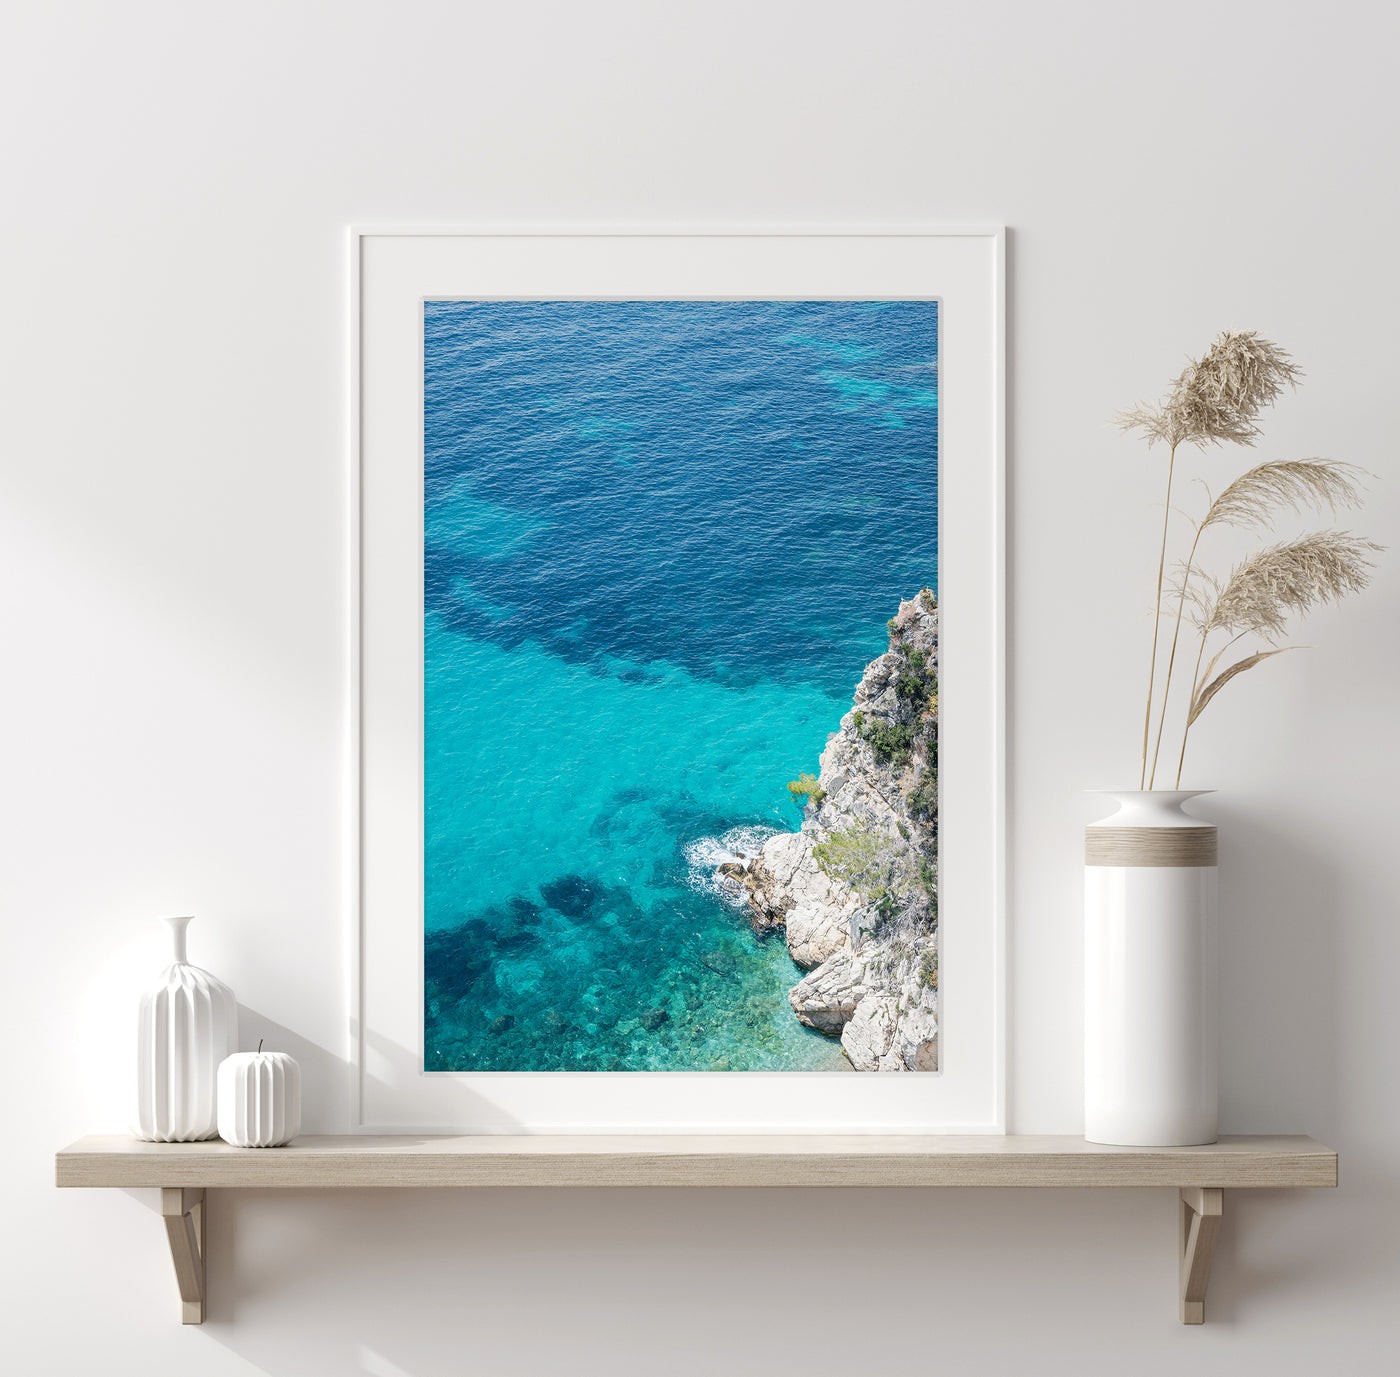 The Mediterranean No 4 - Art print by Cattie Coyle Photography on shelf